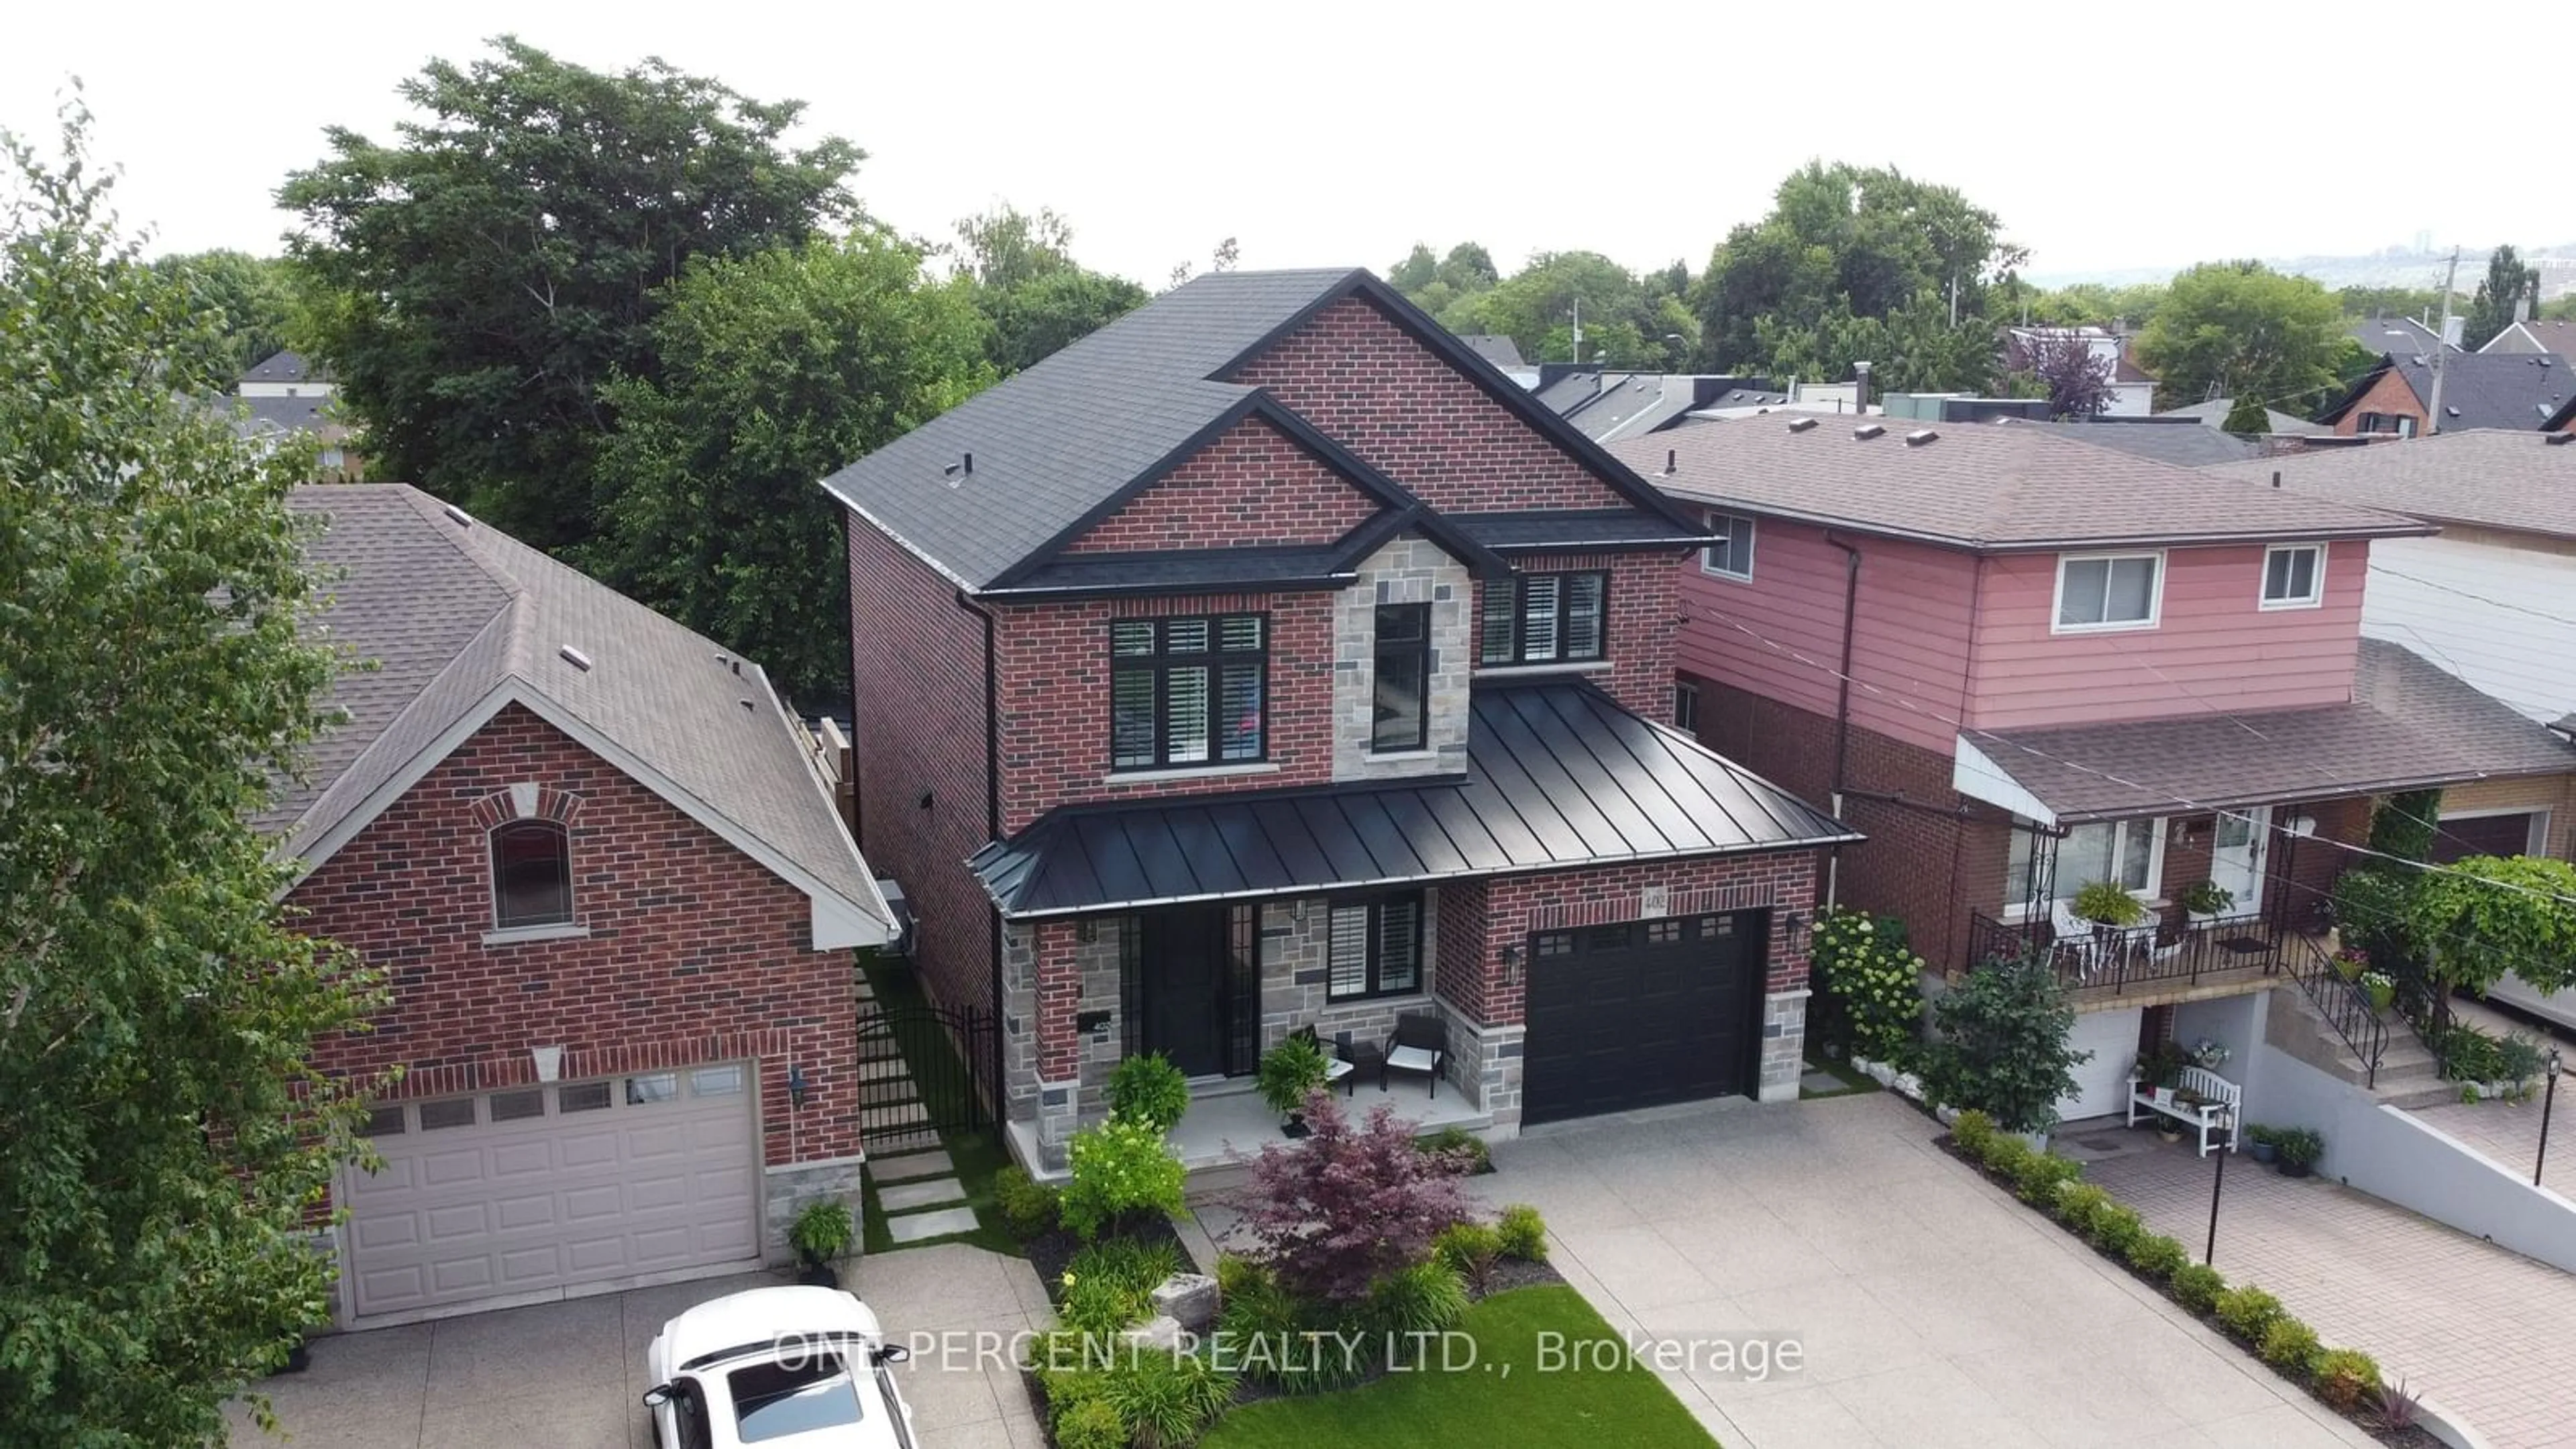 Home with brick exterior material for 402 Bay St, Hamilton Ontario L8L 1N1